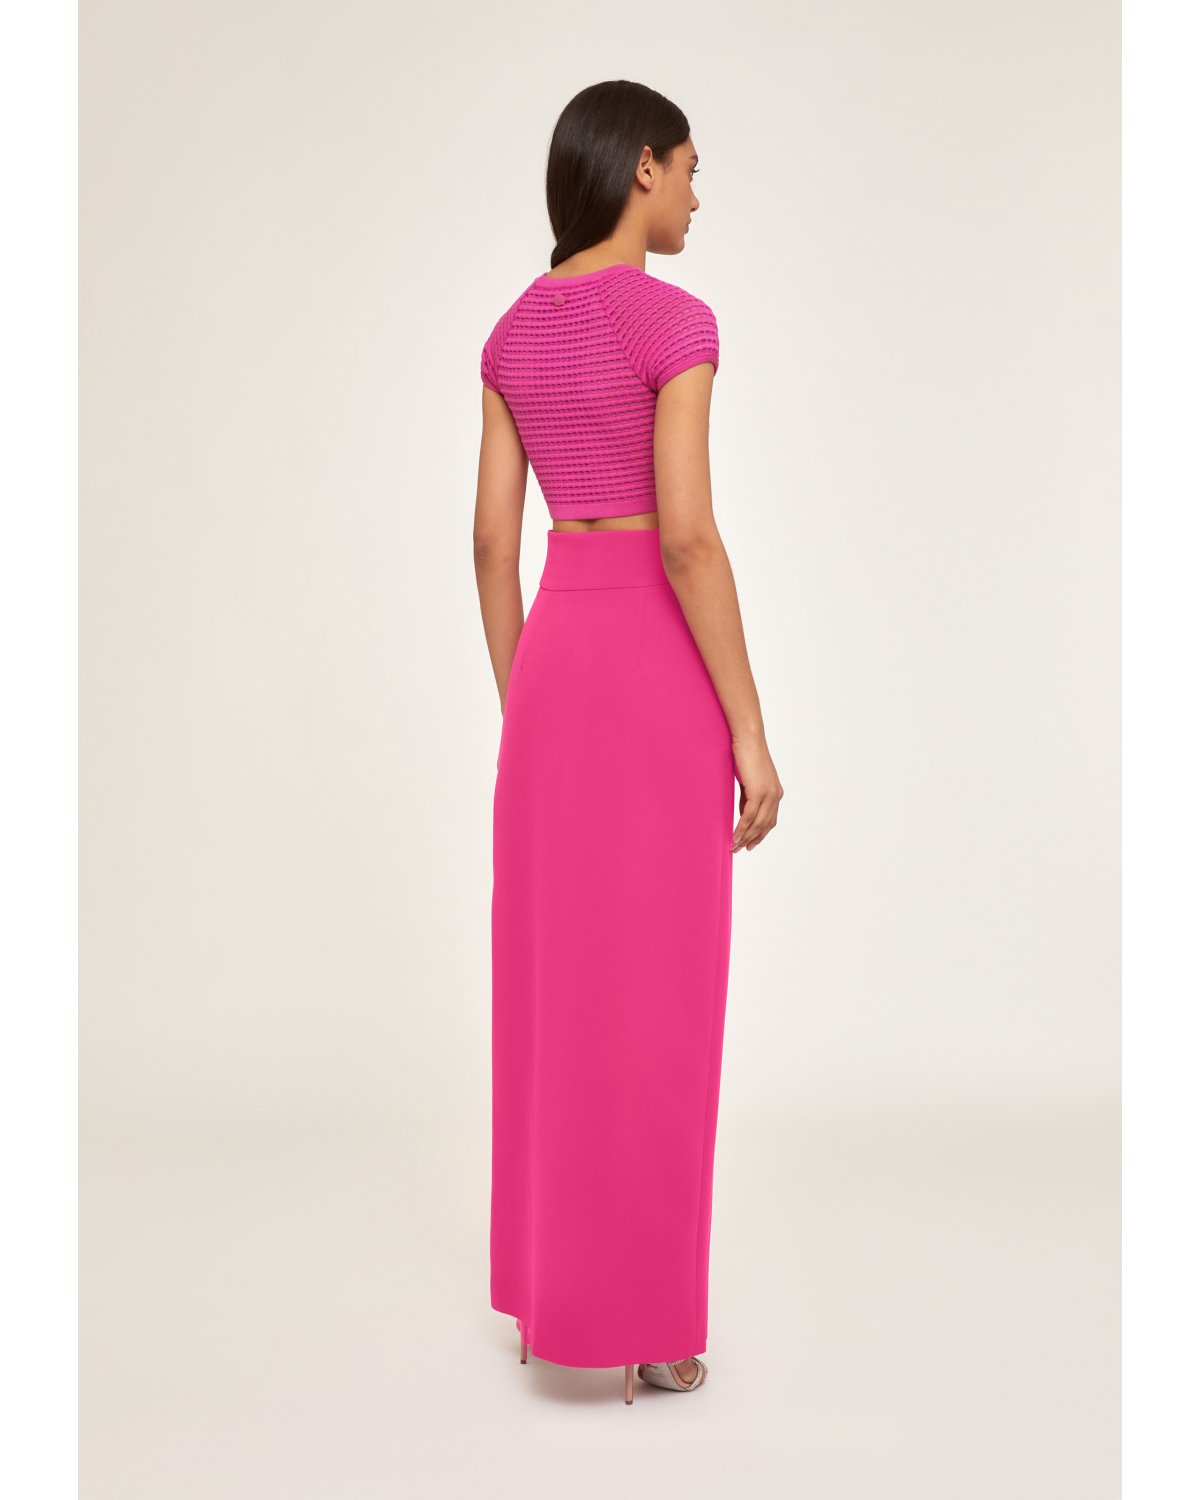 Fuchsia iconic crop top | gregoracci-carousel-3, Iconic Capsule Collection, 73_74 | Genny